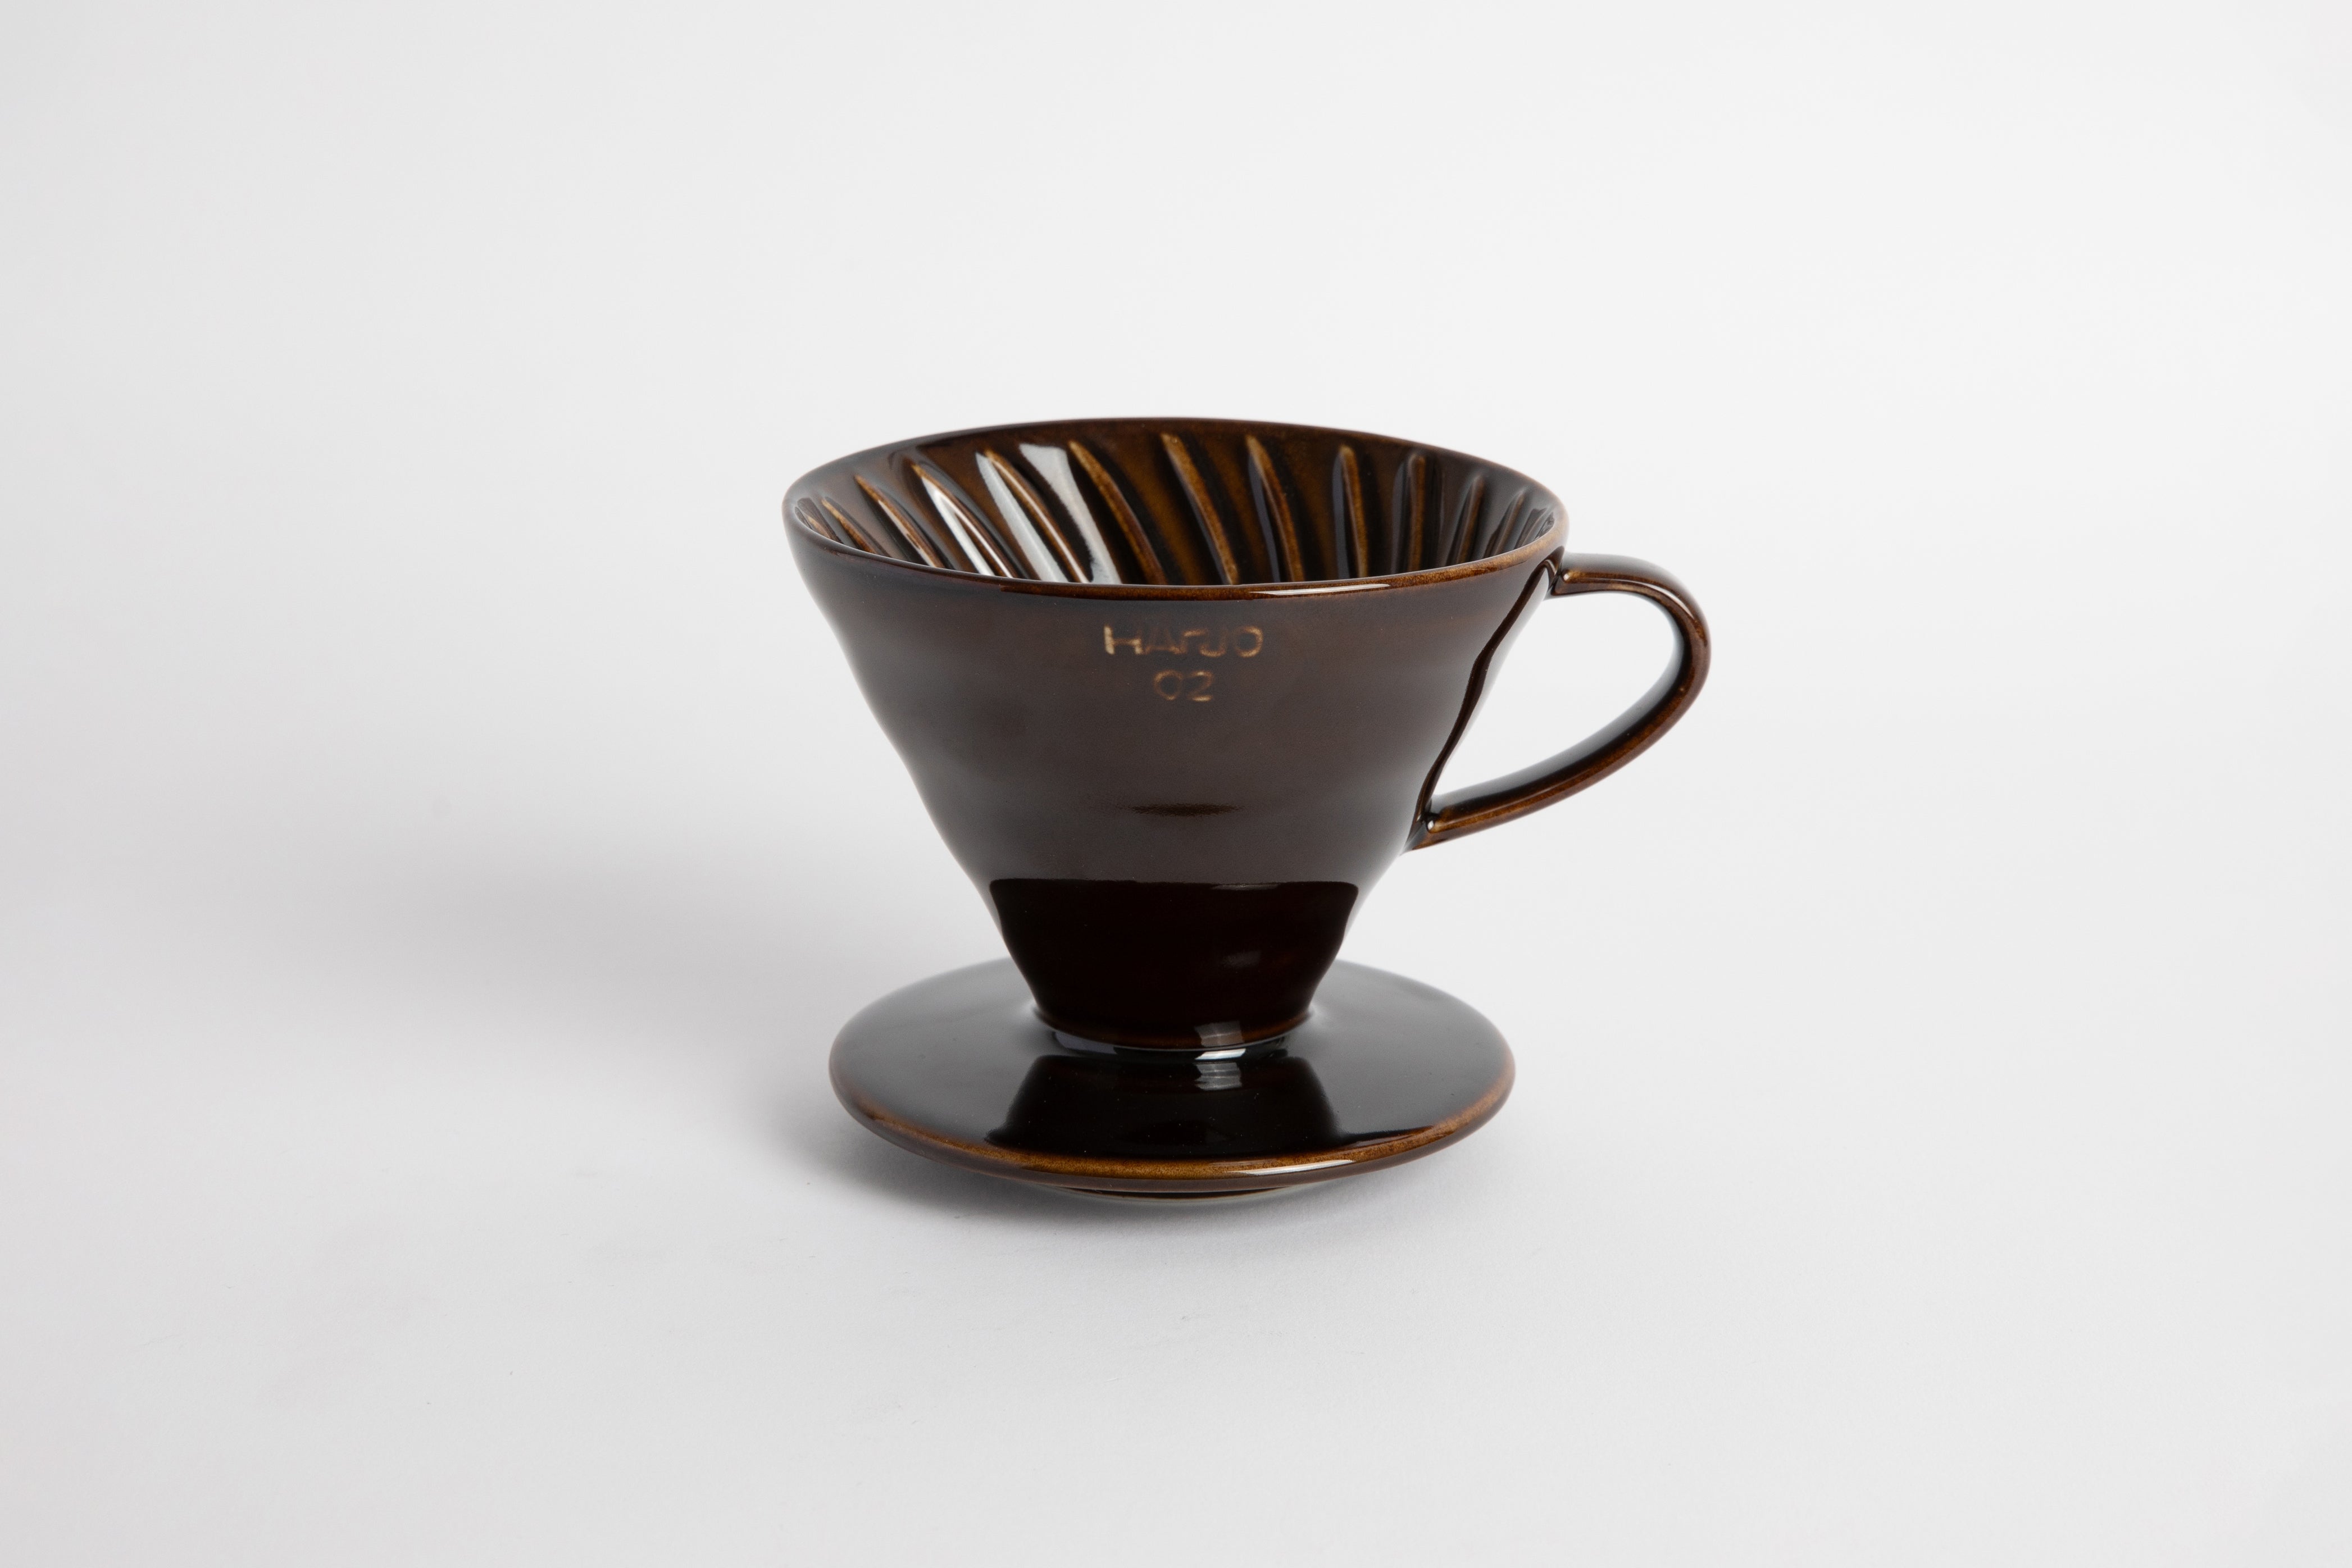 V60 Pourover Set (Server, Dripper and Filters) by Canyon Coffee